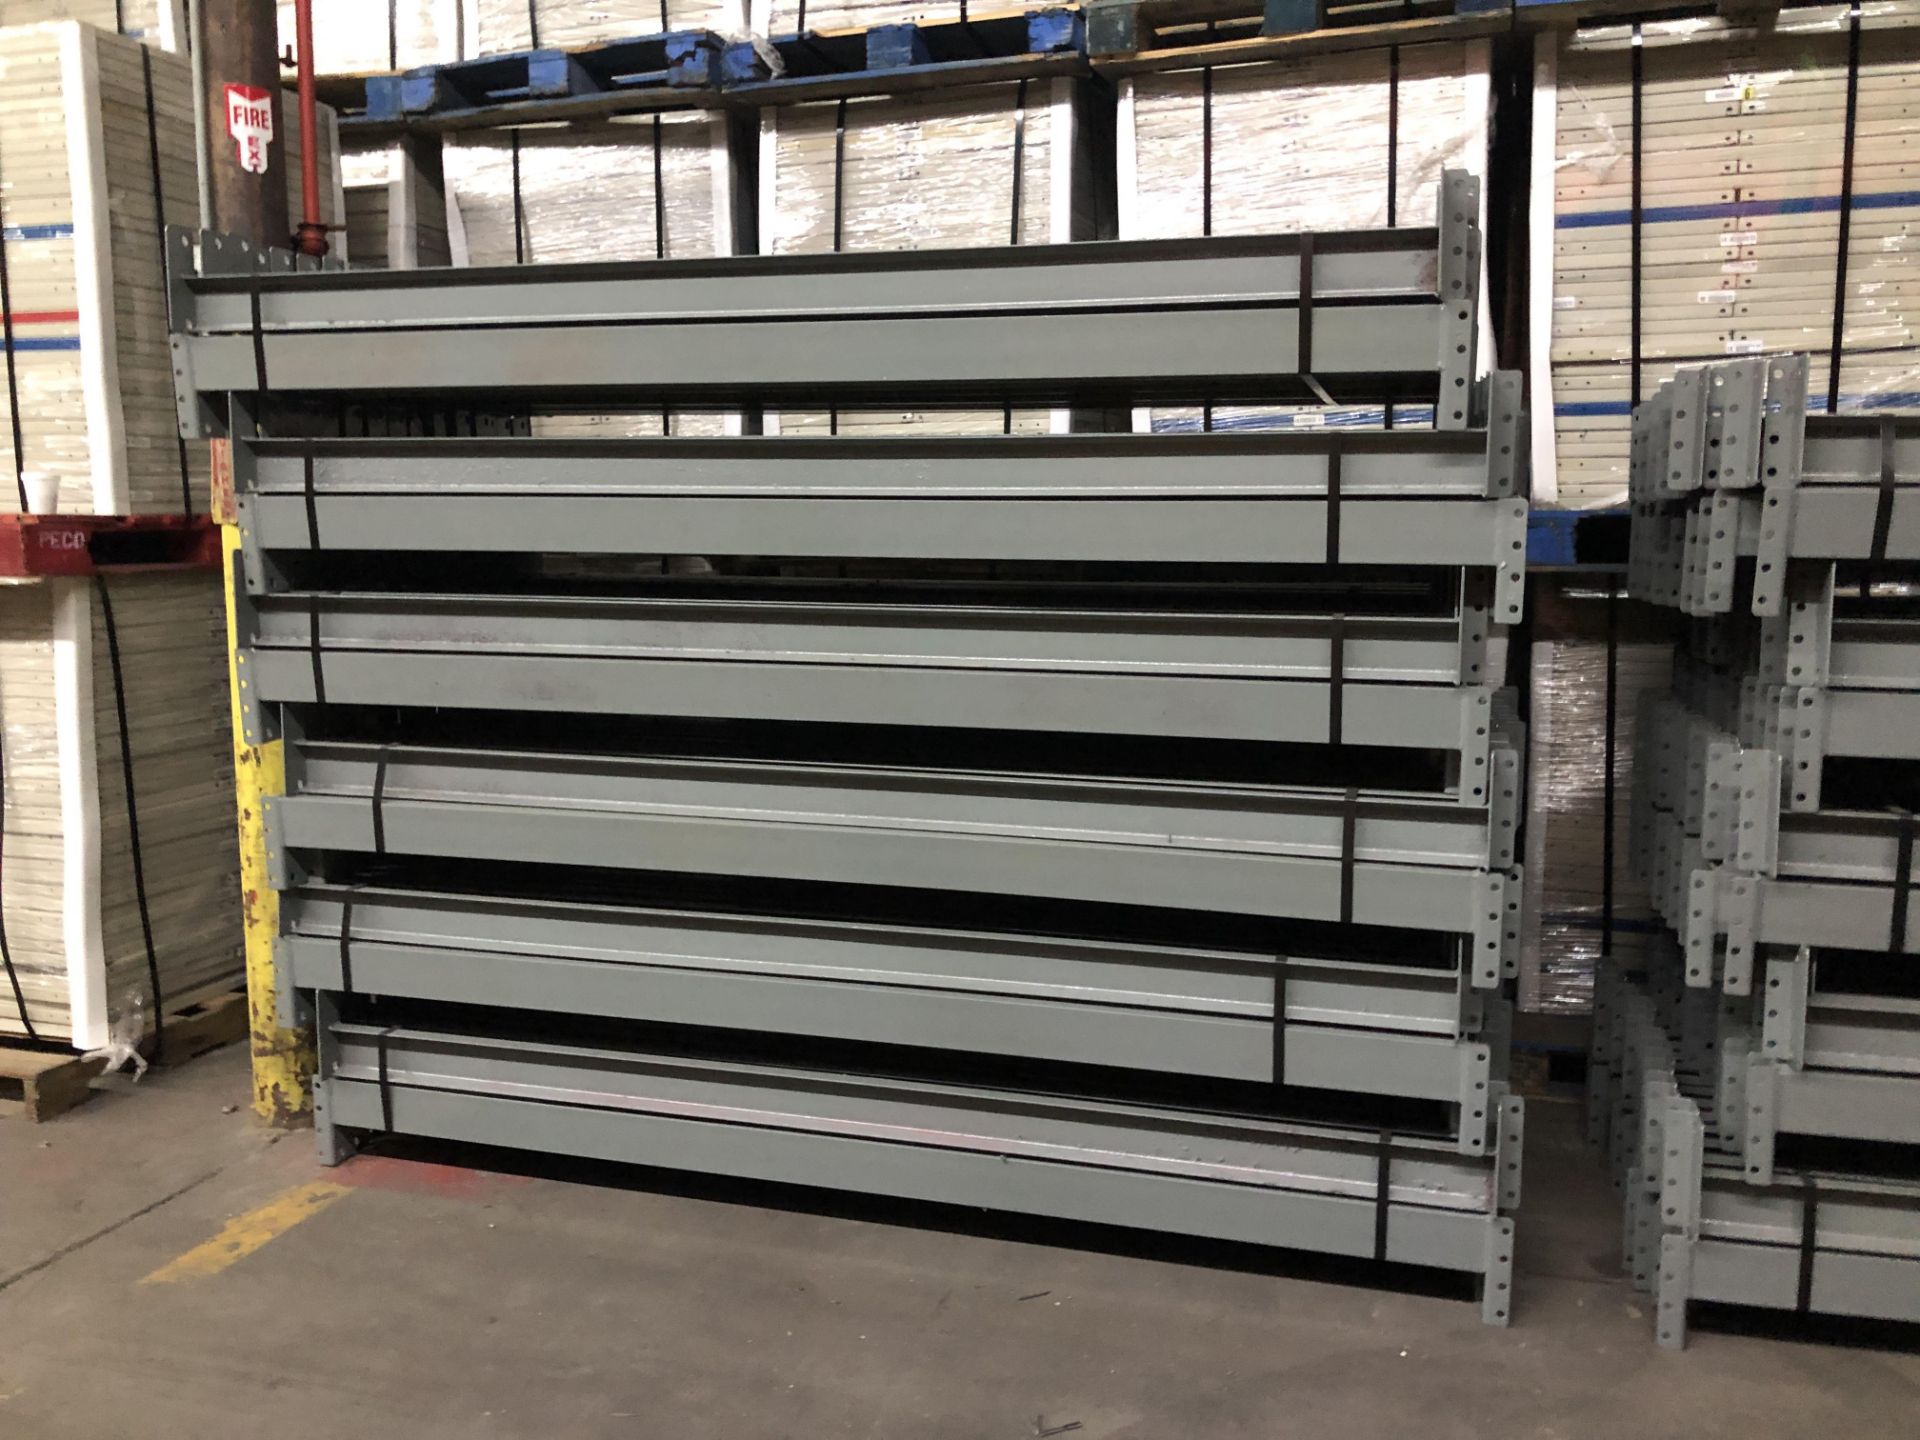 9 BAYS OF 10.5'H X 42"D X 93"L STRUCTURAL STYLE PALLET RACKS - Image 4 of 5